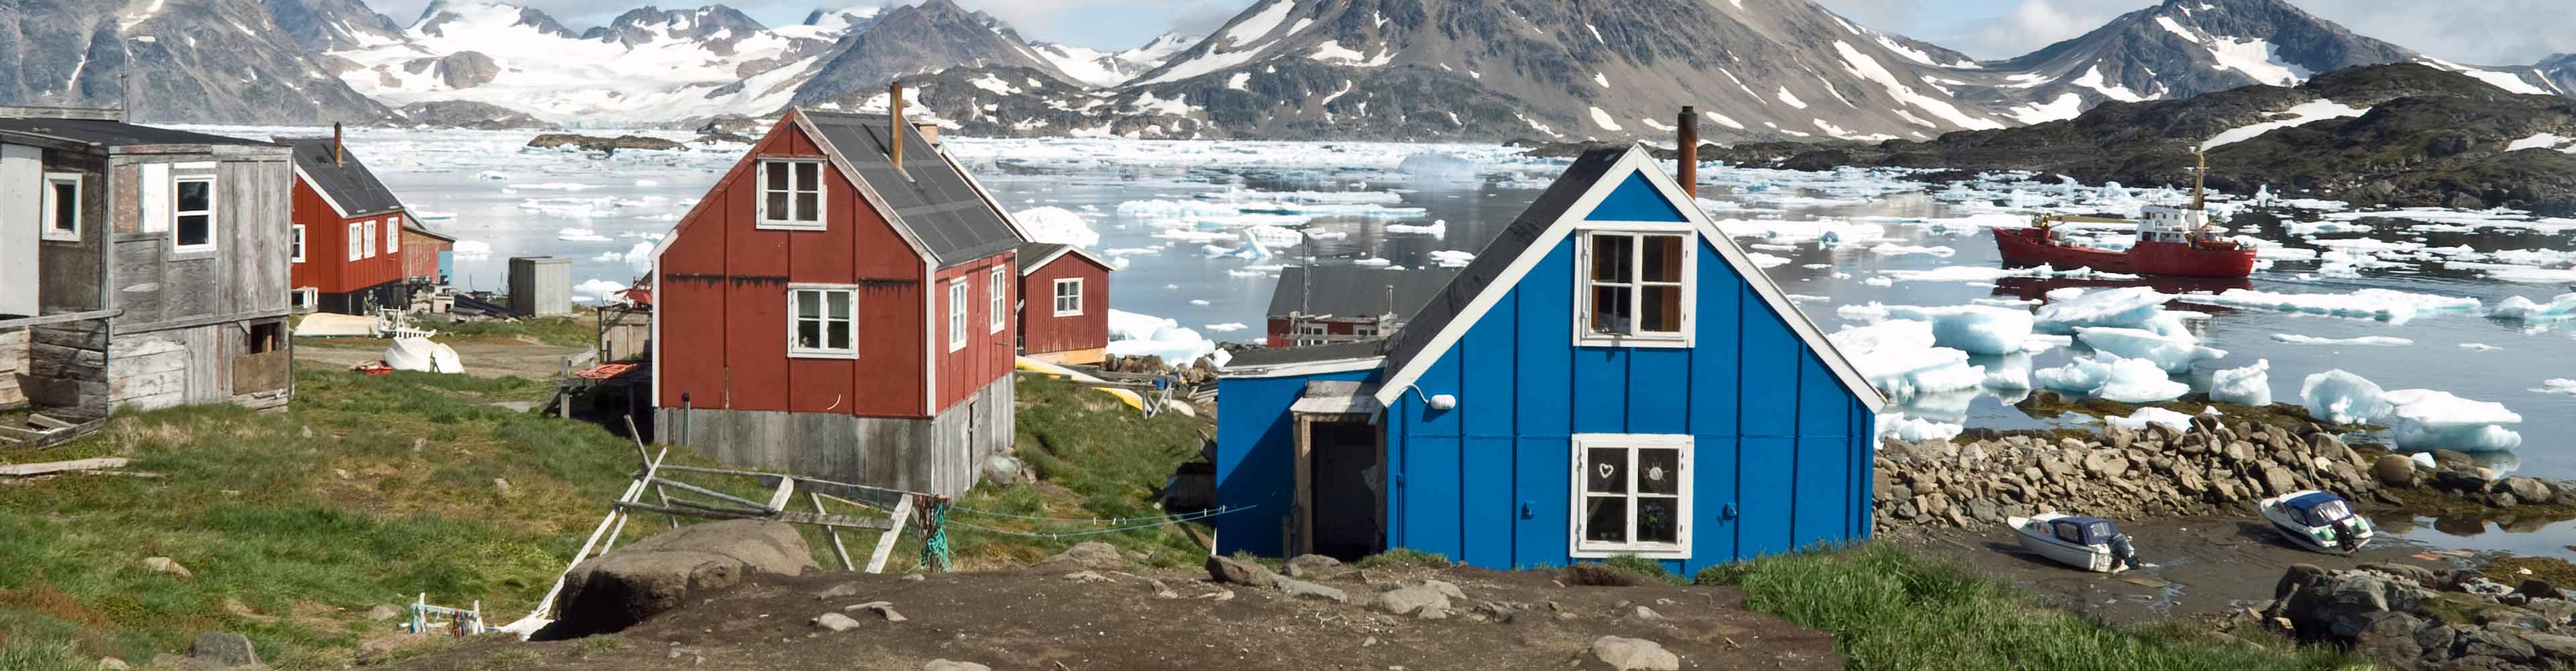 Essential Greenland: Southern Coasts and Disko Bay